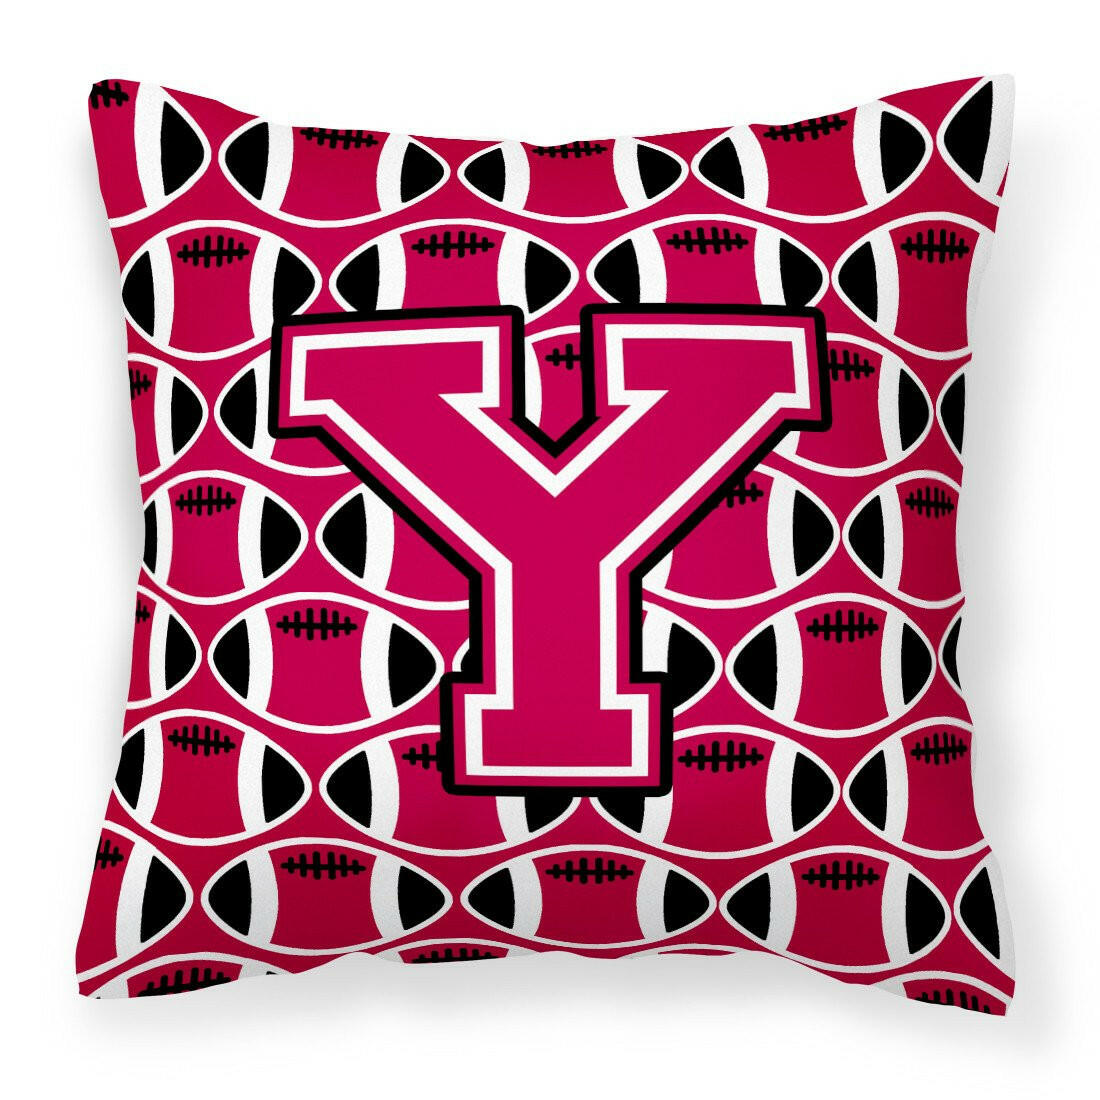 Letter Y Football Crimson and White Fabric Decorative Pillow CJ1079-YPW1414 by Caroline's Treasures